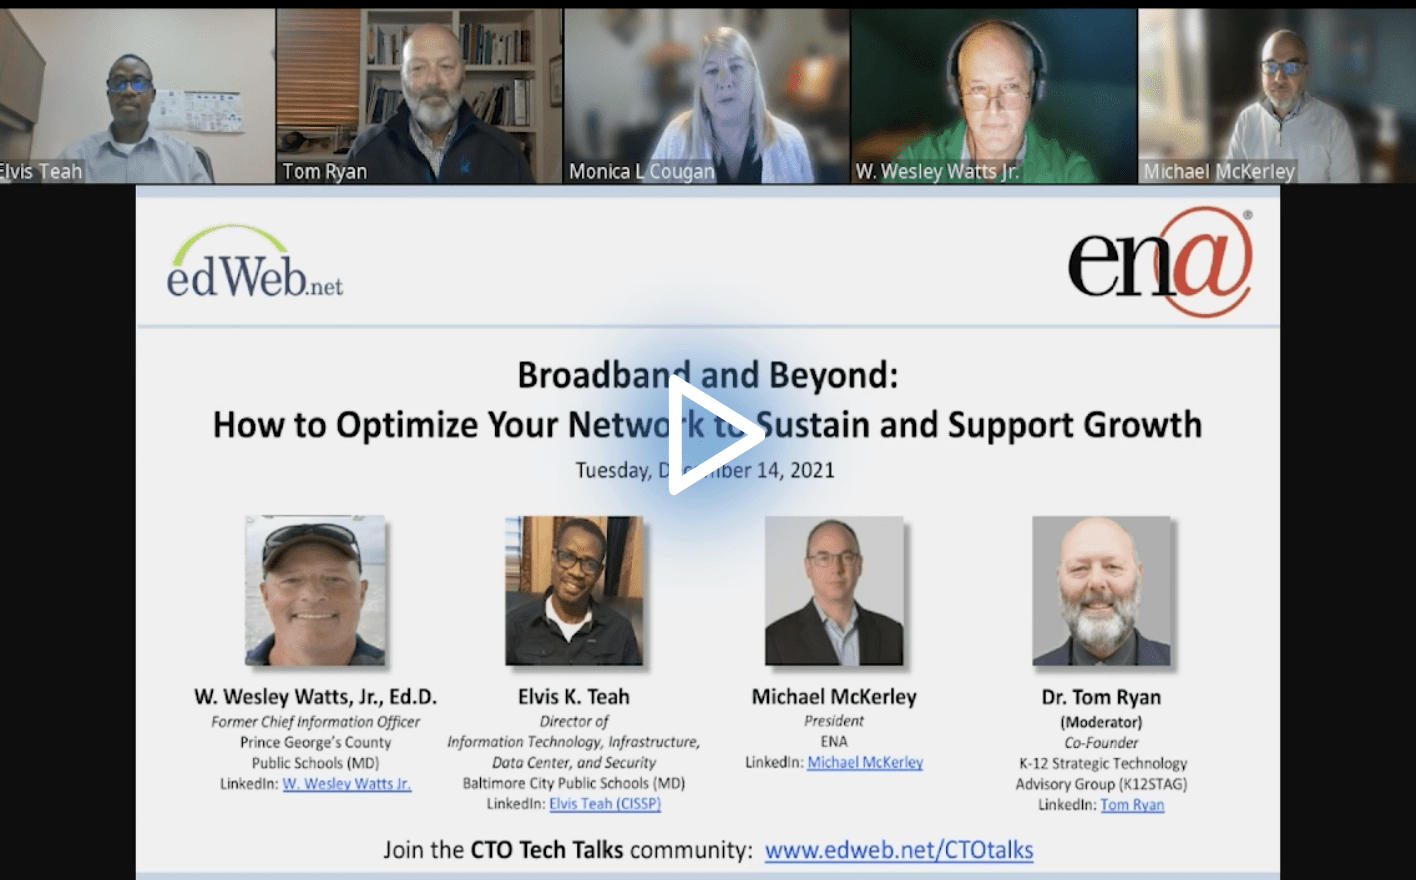 Broadband and Beyond: How to Optimize Your Network to Sustain and Support Growth edLeader Panel recording link